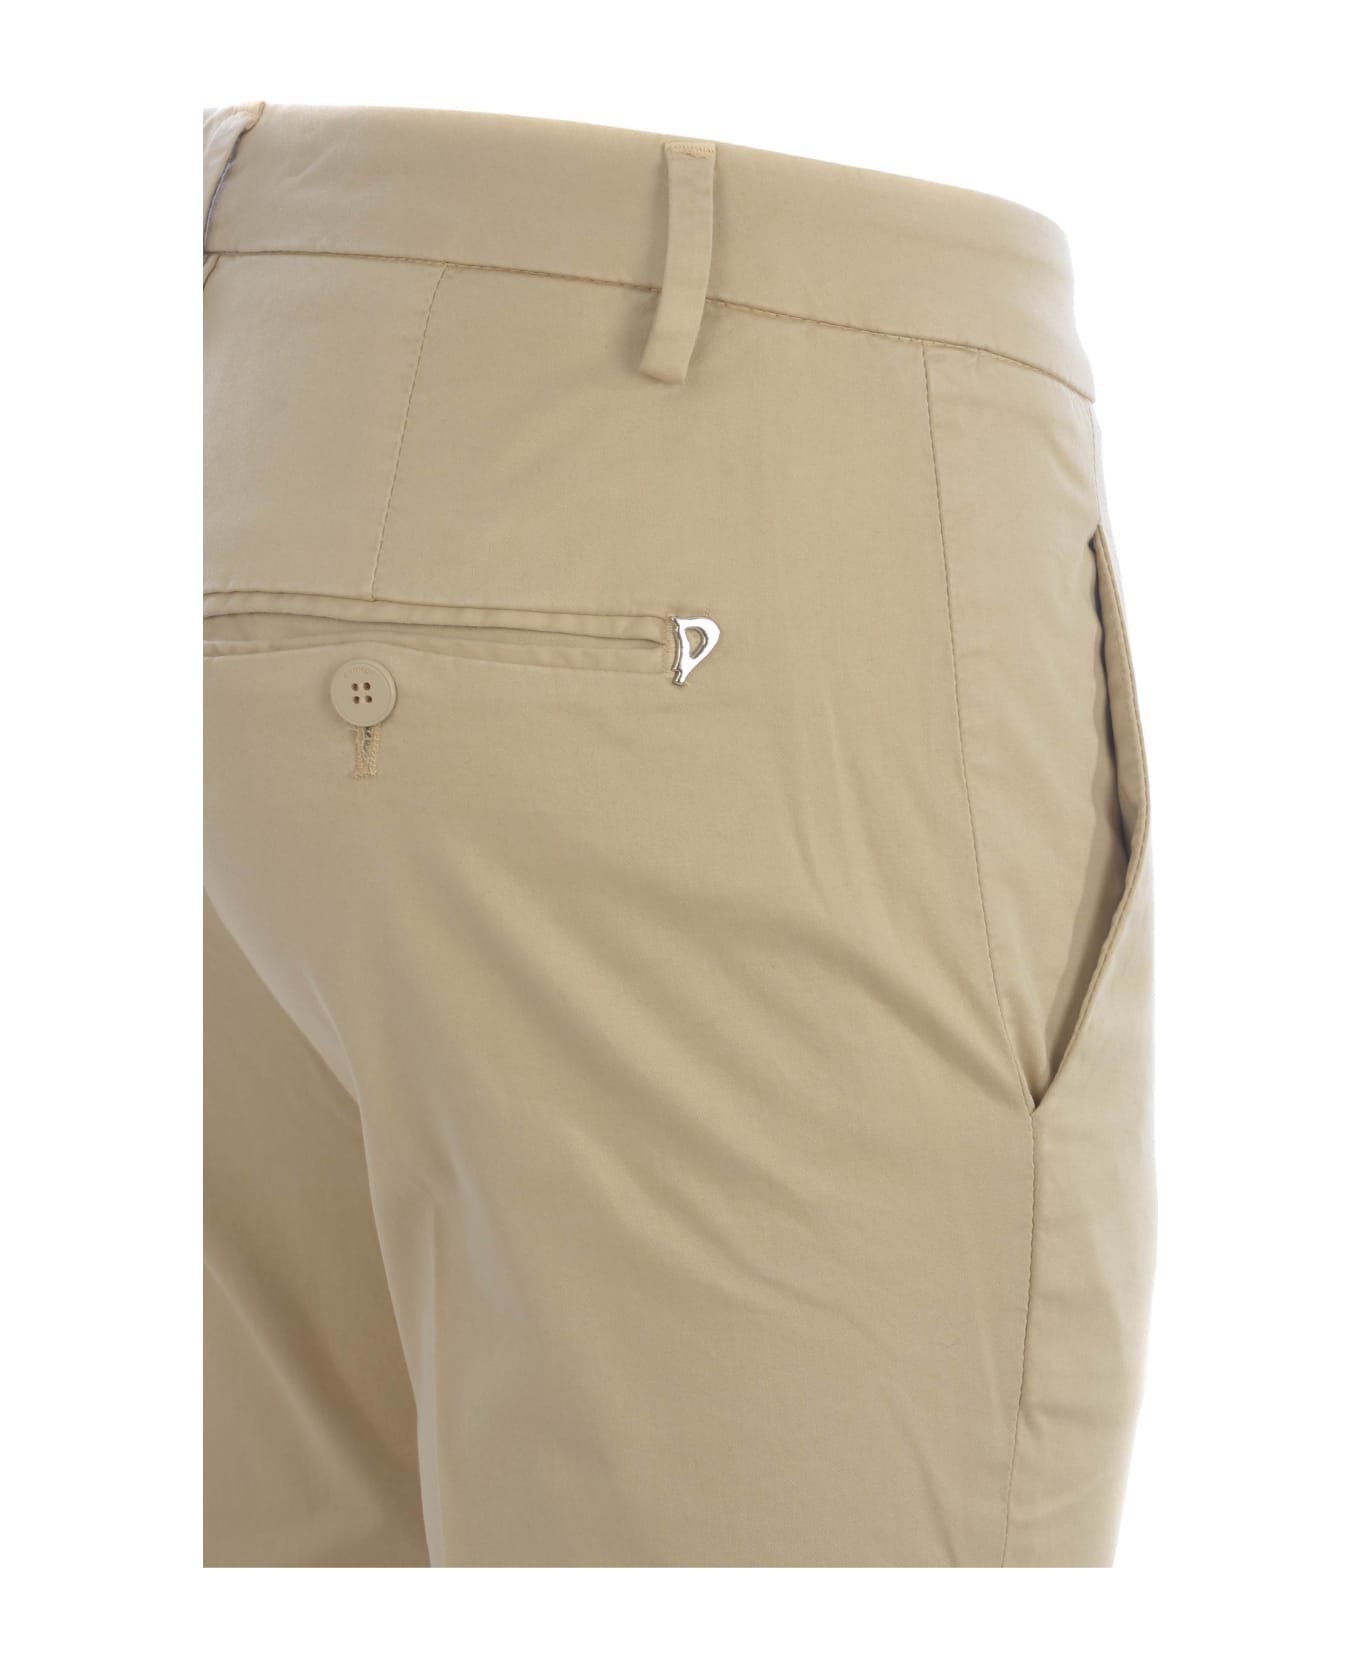 Dondup Trousers Dondup "perfect" In Stretch Cotton - Beige ボトムス